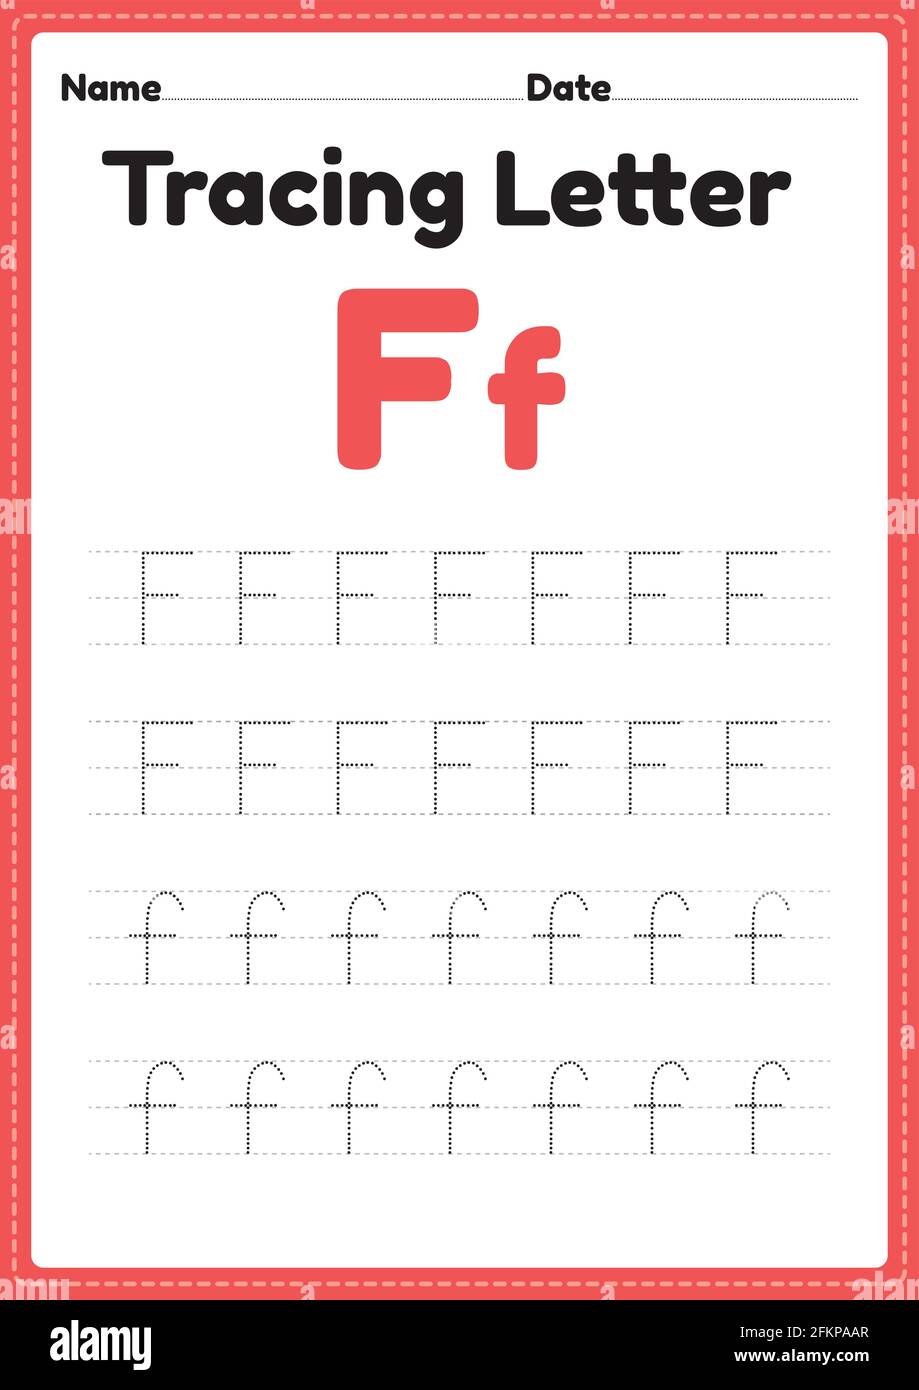 Tracing Letter F Alphabet Worksheet For Kindergarten And Preschool Kids For Handwriting Practice And Educational Activities In A Printable Page Illust Stock Vector Image Art Alamy